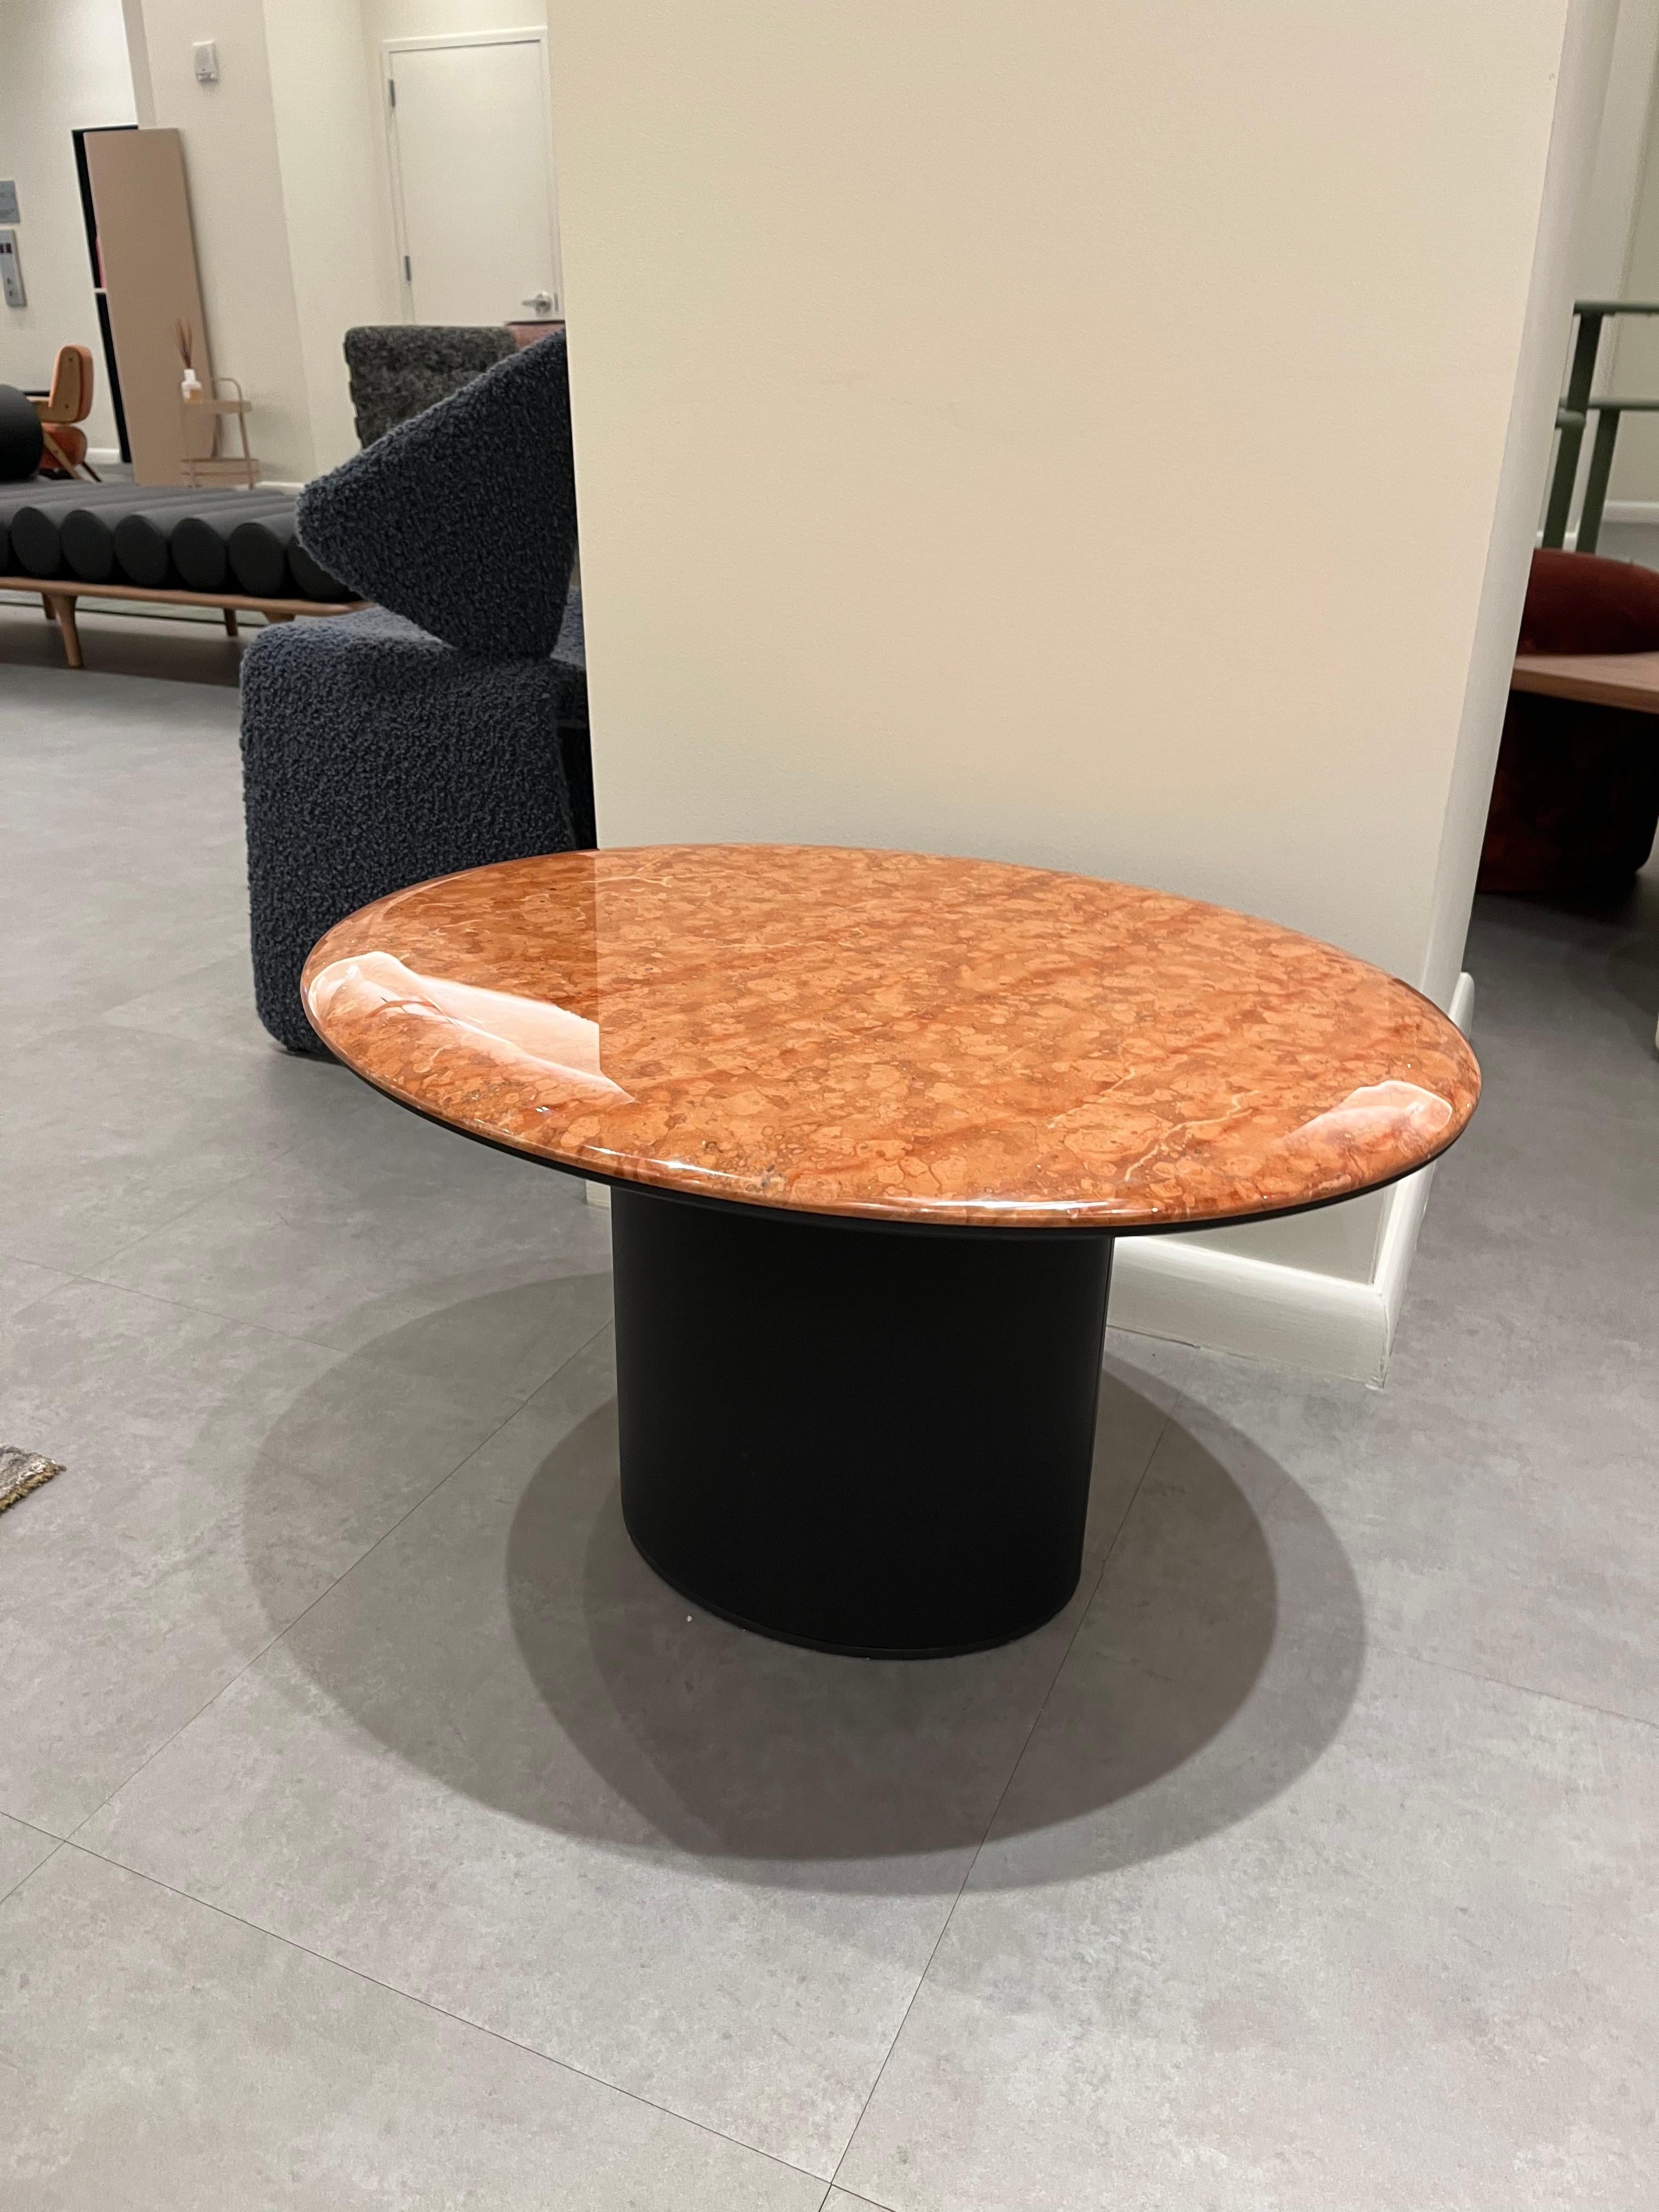 Antilles Rosso 76 x 60 h = 45 cm
Marble Rosso Asiago
Base: leather covered Color black
Glides: felted glides

At the time of the Wiener Werkstätte around the 1900s, Josef Hoffmann designed extravagant brooches made in traditional craftsmanship.